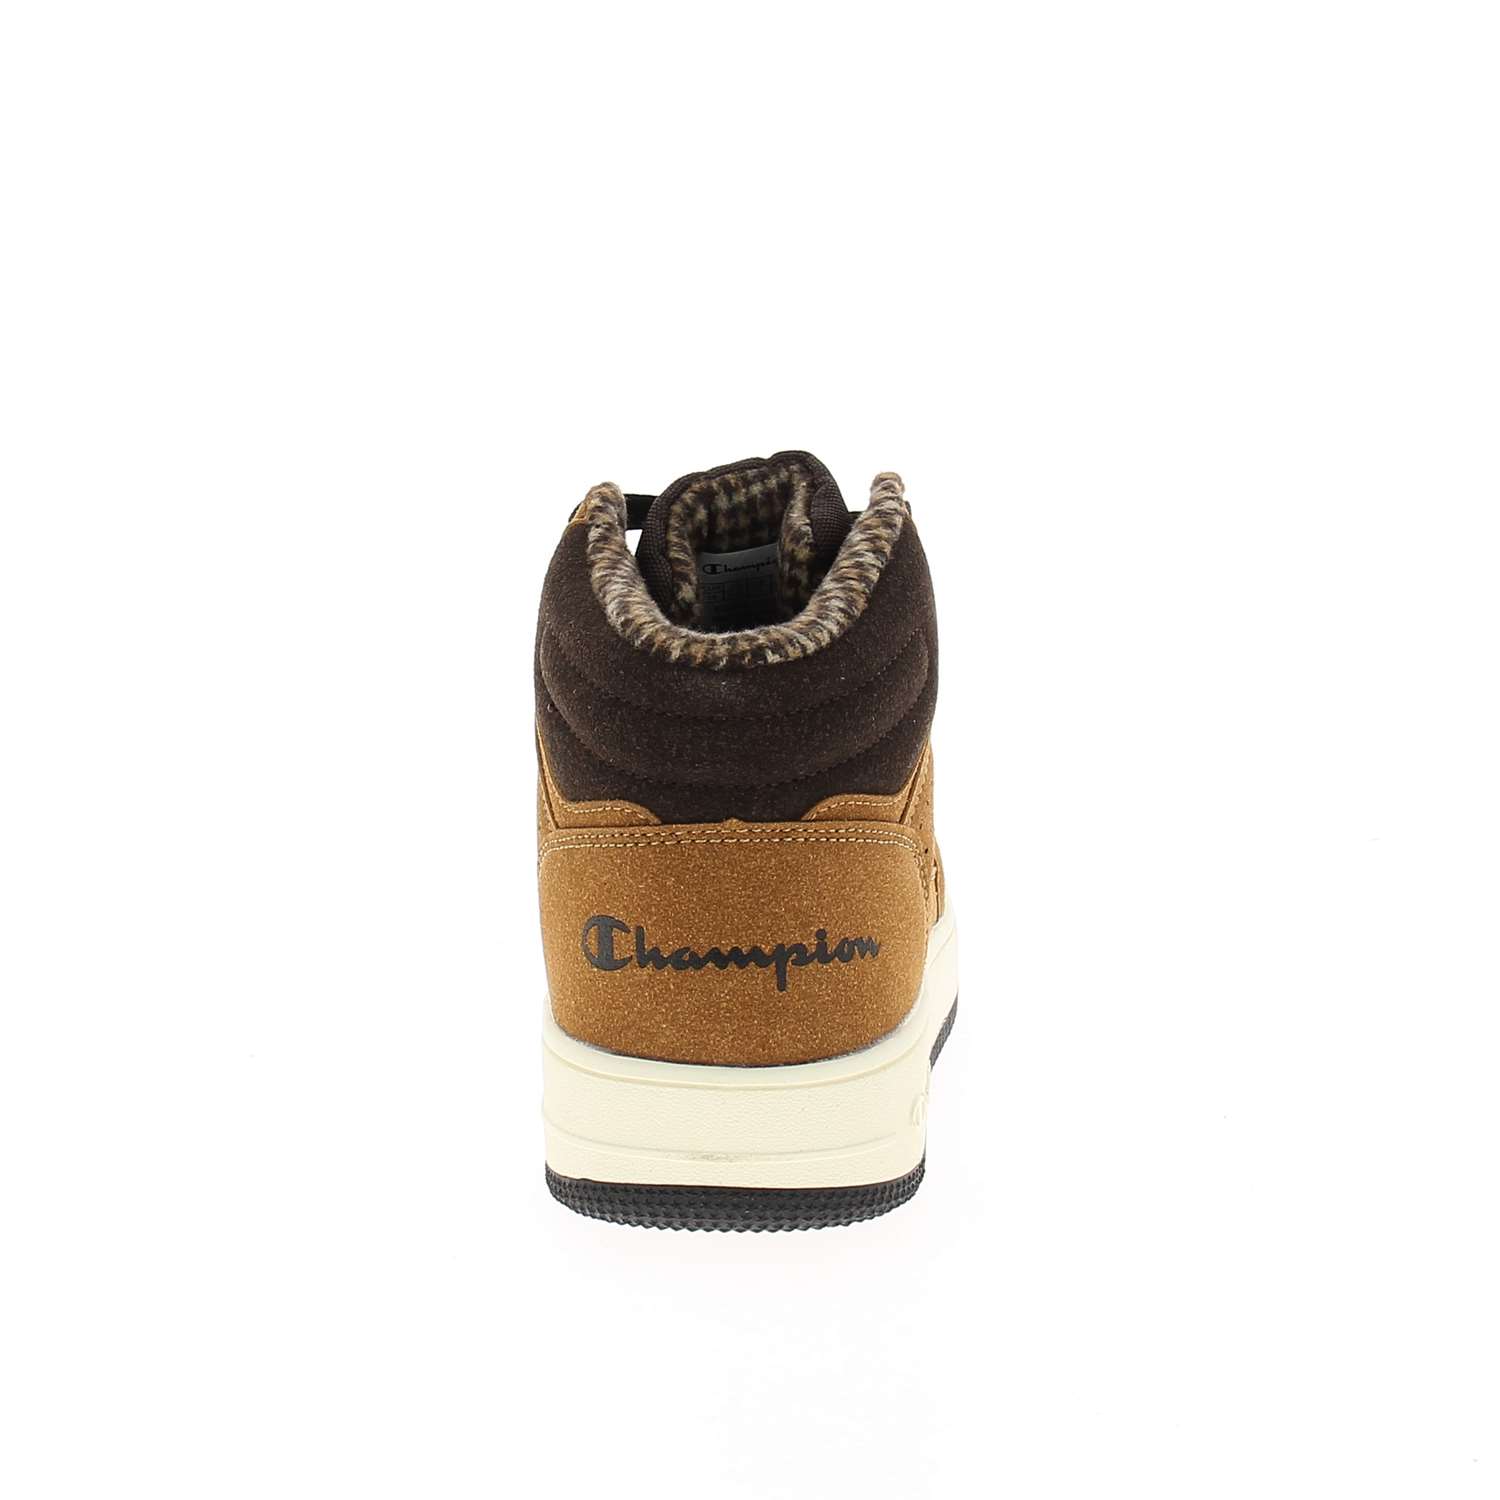 04 - REBOUND MID GS - CHAMPION - Chaussures montantes - Synthétique